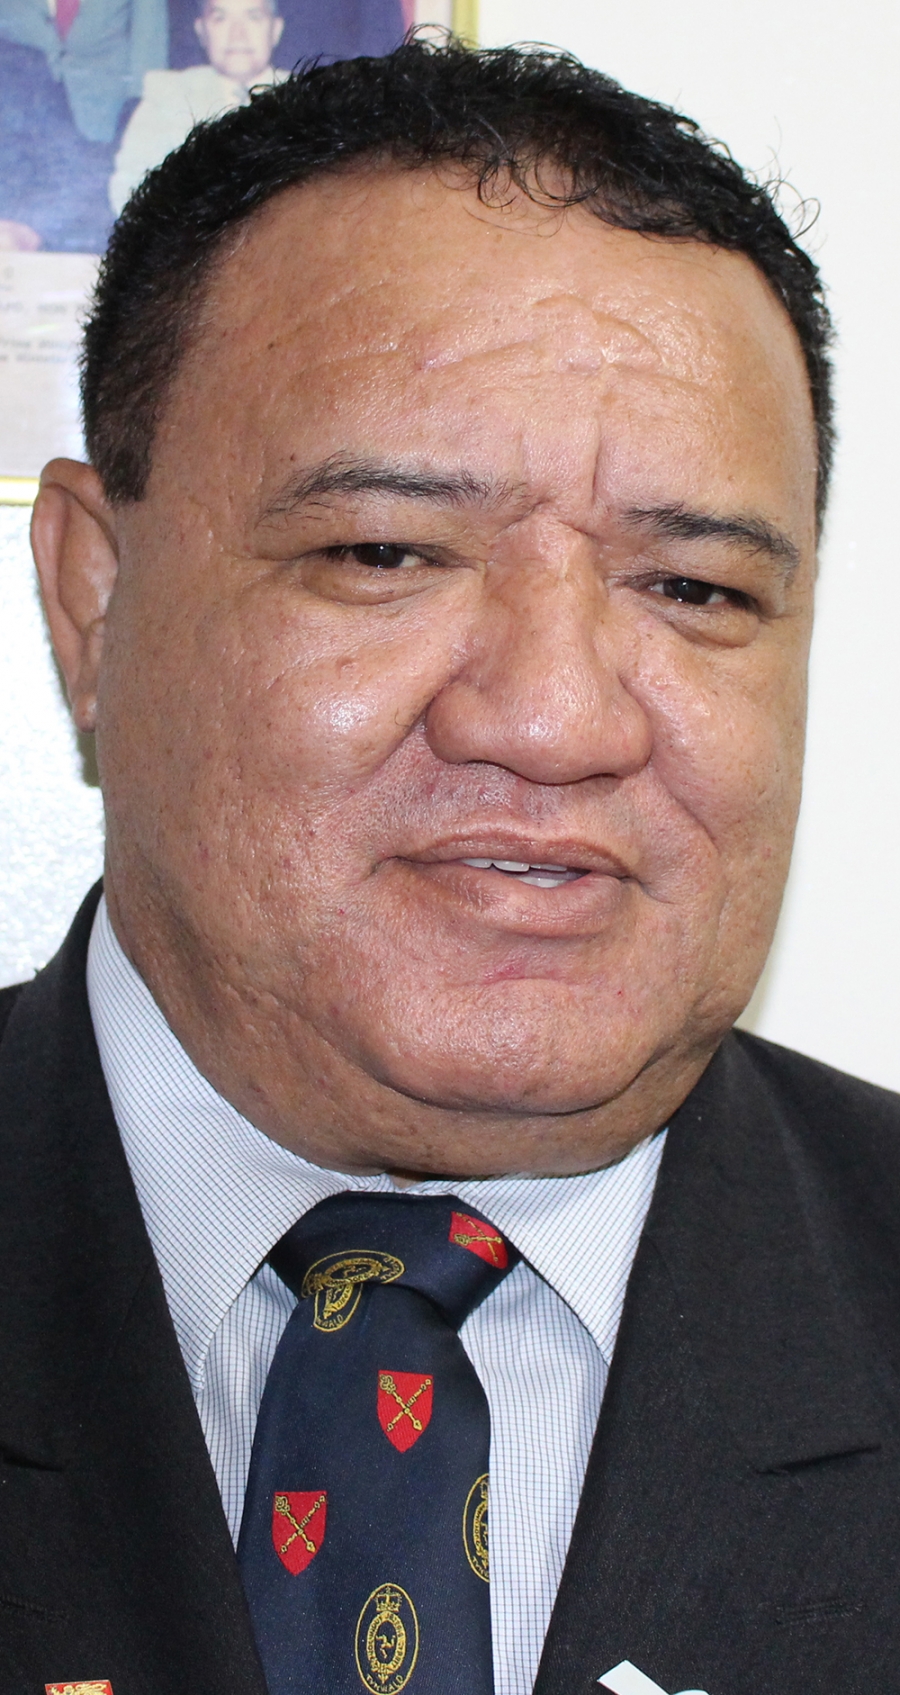 Pick locals first for jobs – Ioane